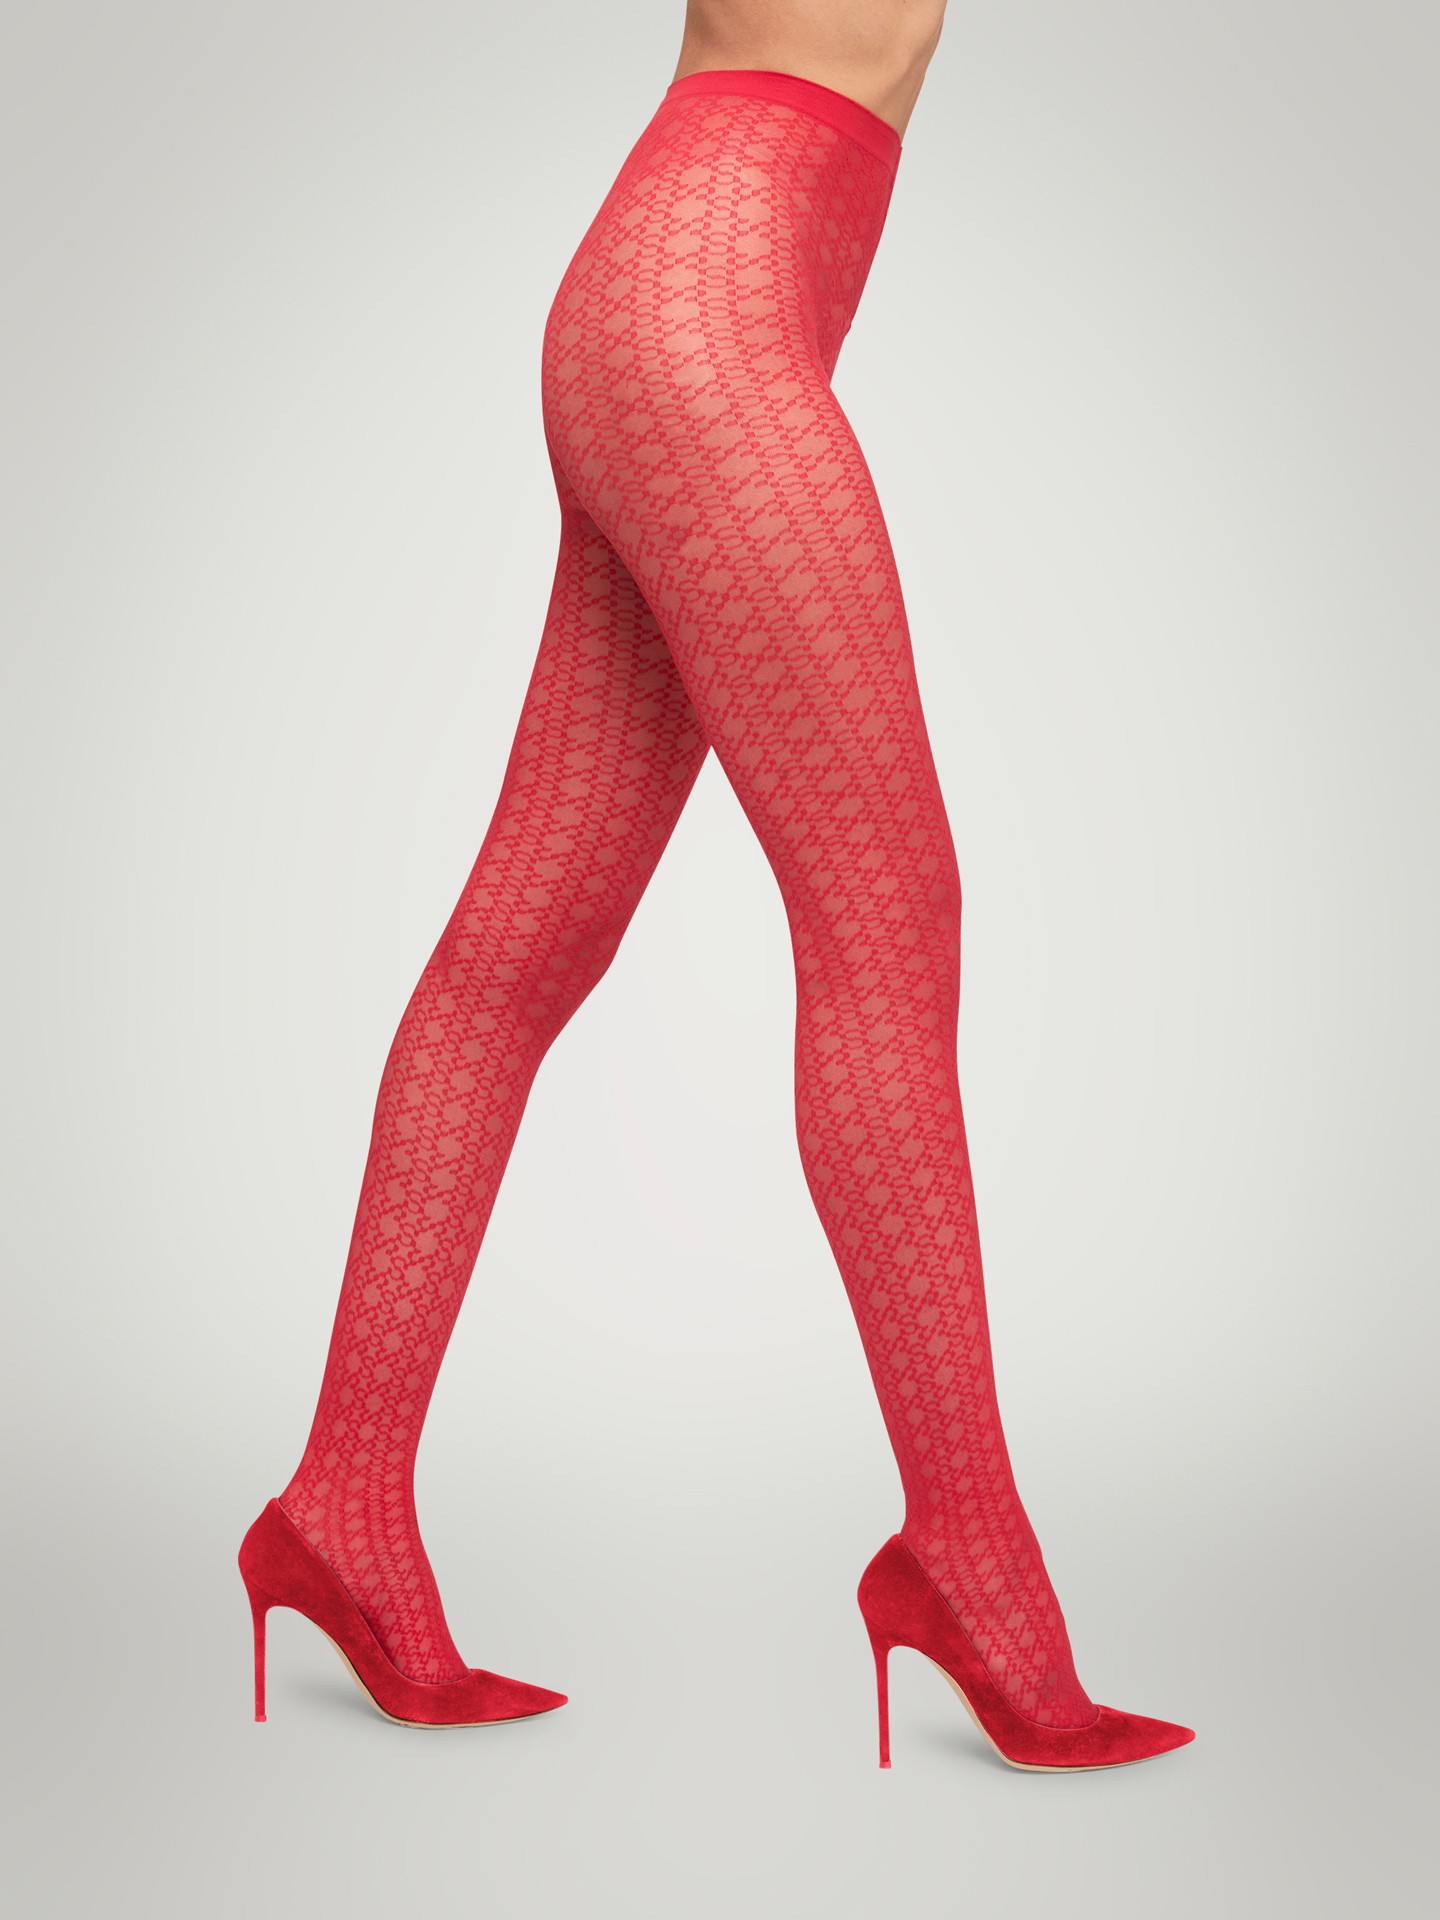 INTRICATE SHEER PATTERN TIGHTS